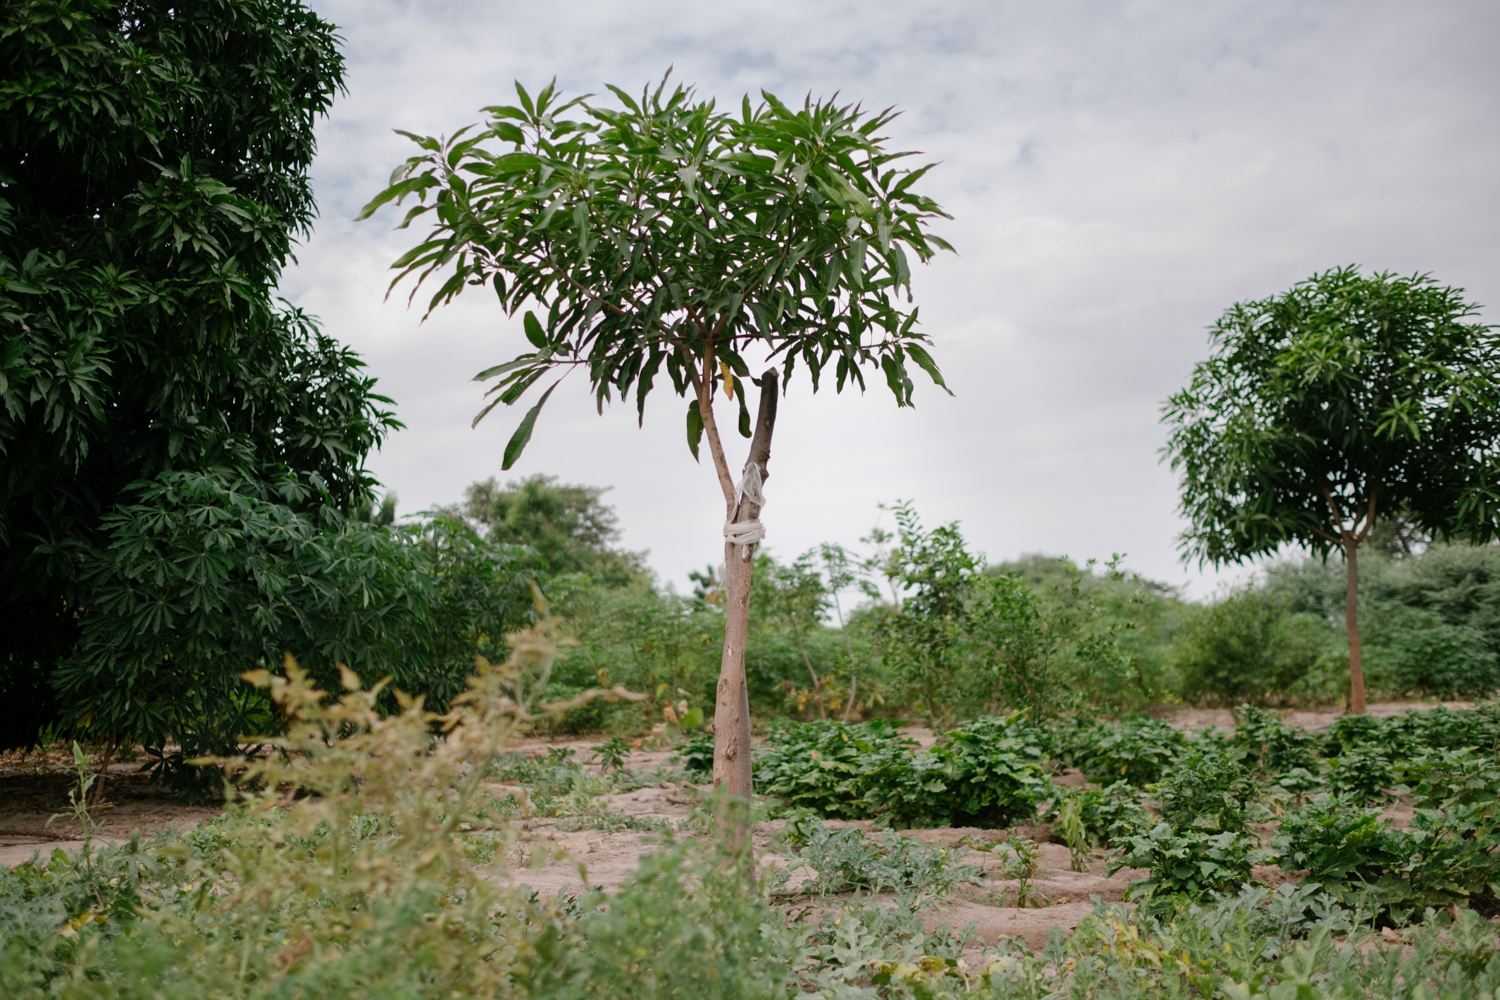 Senegal-Ecosia-Forest-Garden-Agroforestry-trees-climate-change--57-of-103-